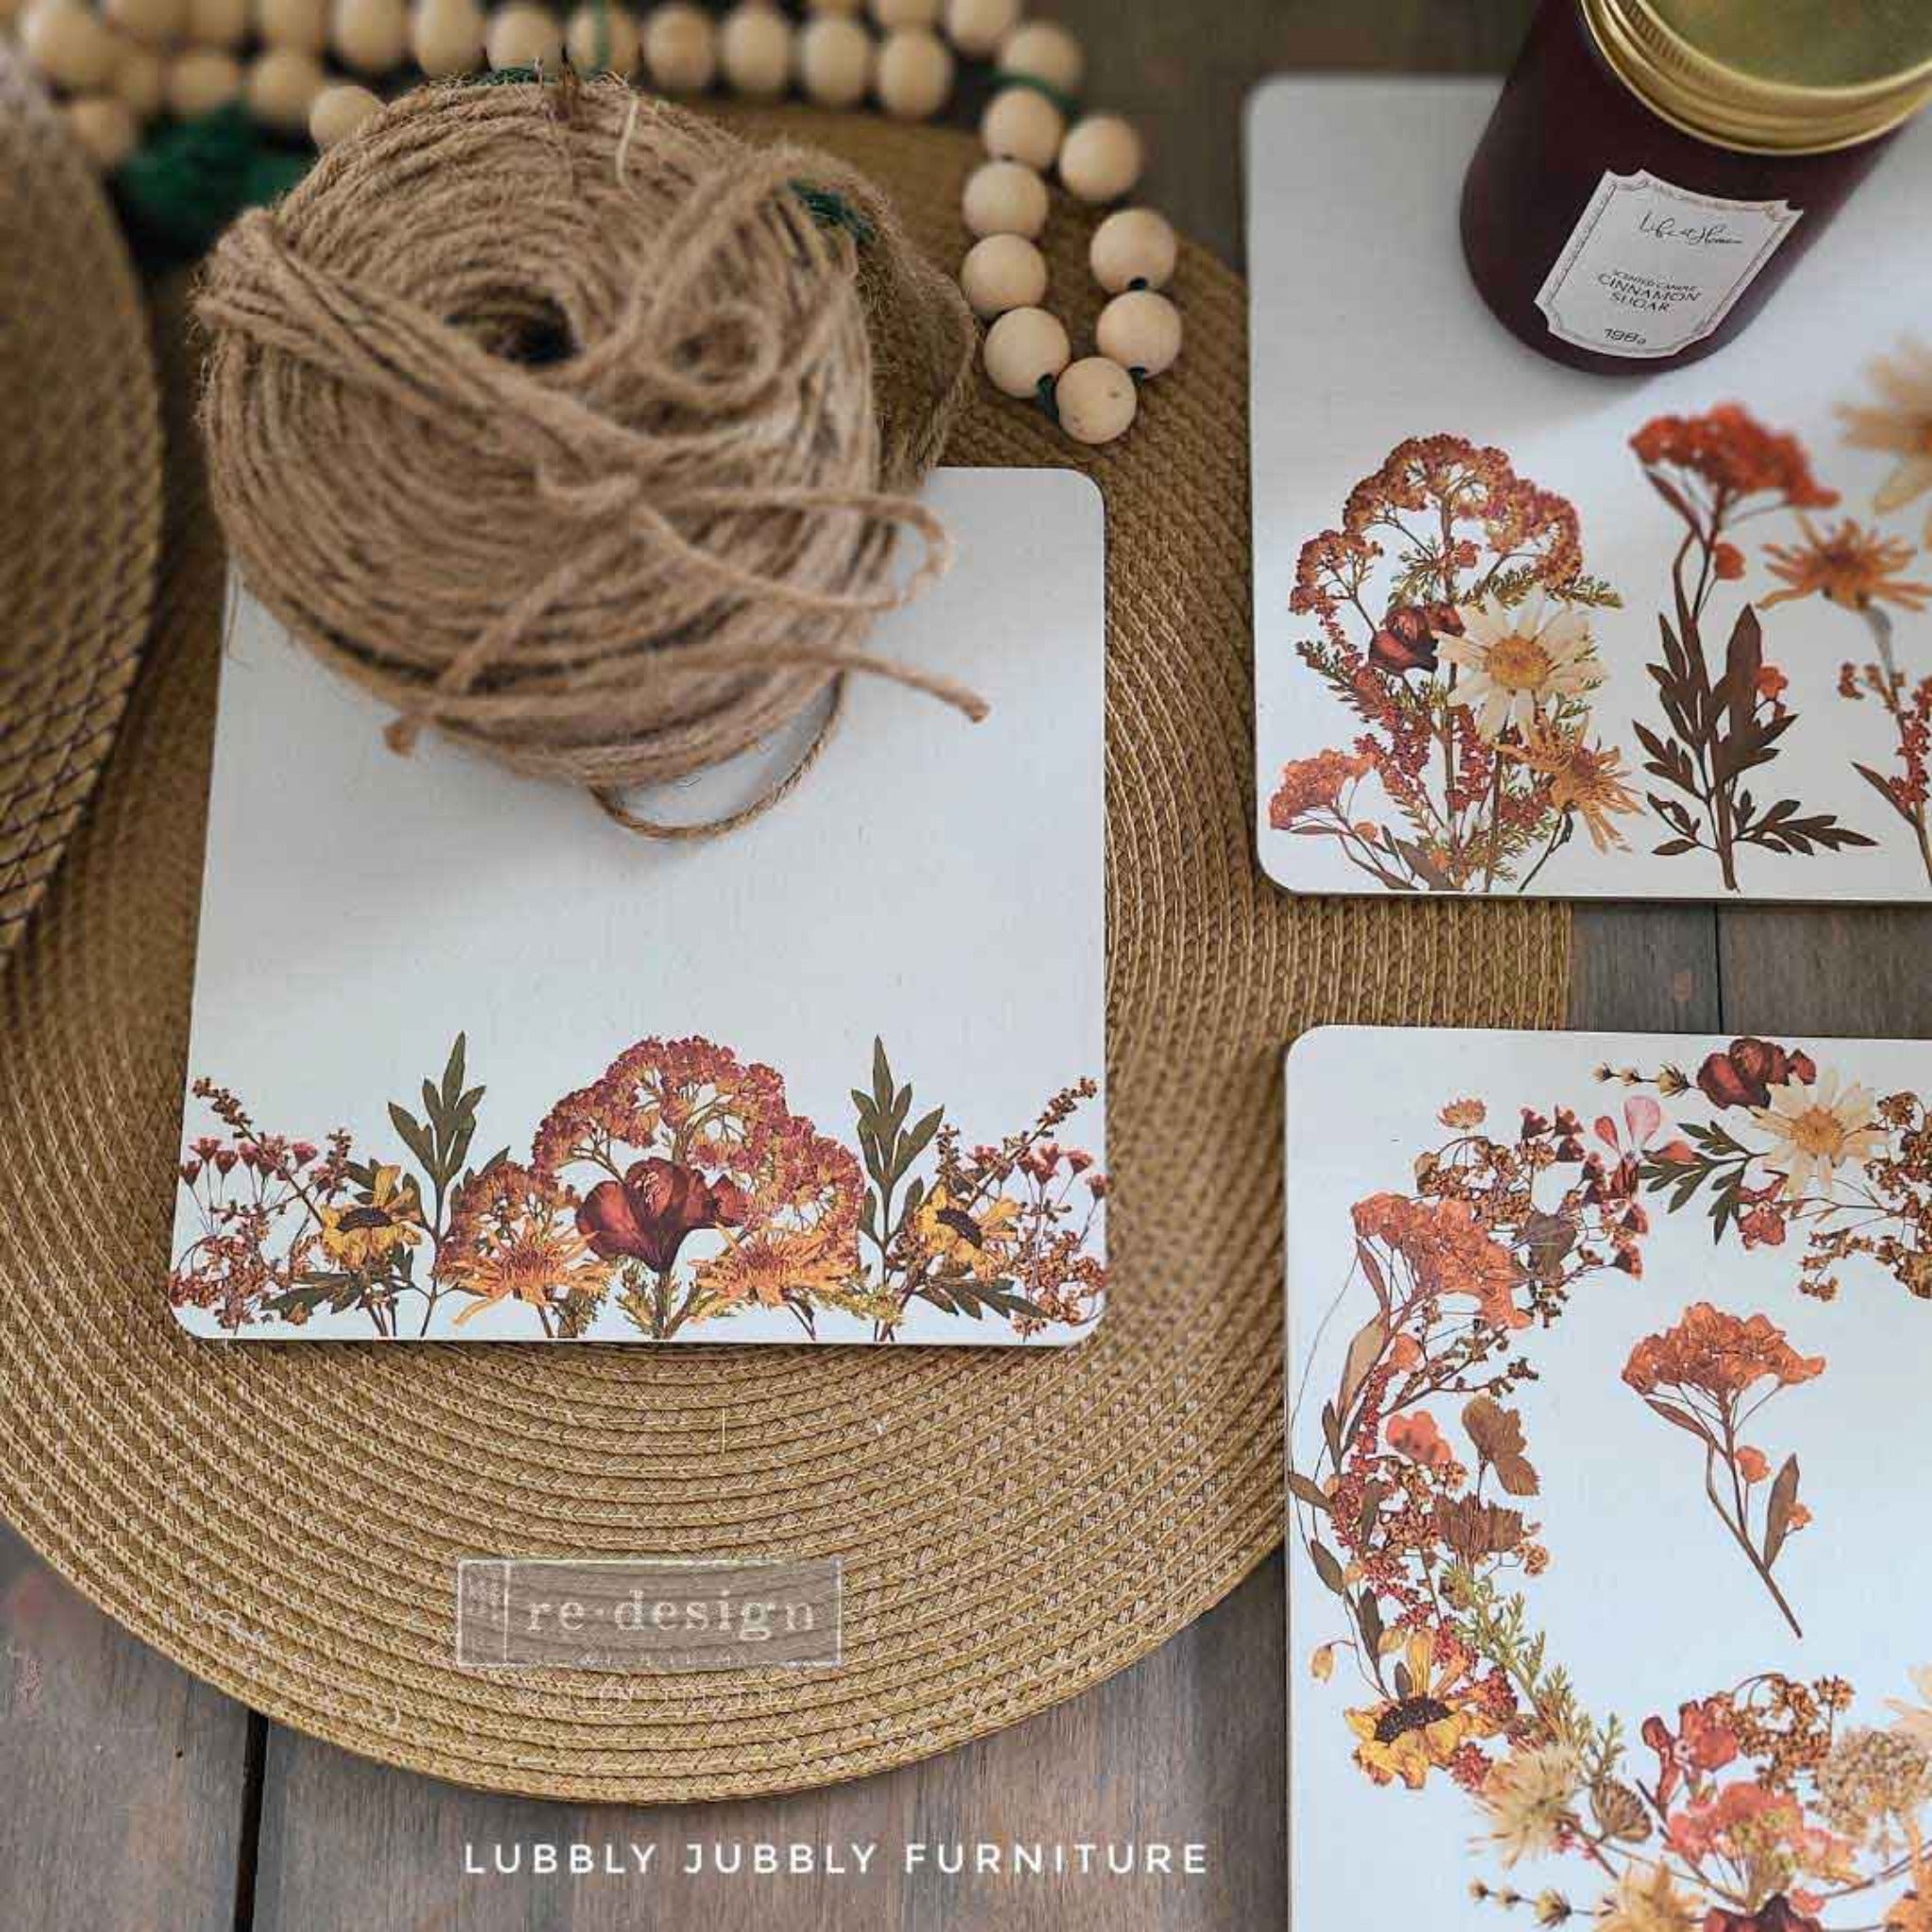 Three white square coasters created by Lubbly Jubbly Furniture feature ReDesign with Prima's Dried Wildflowers small transfers on them.